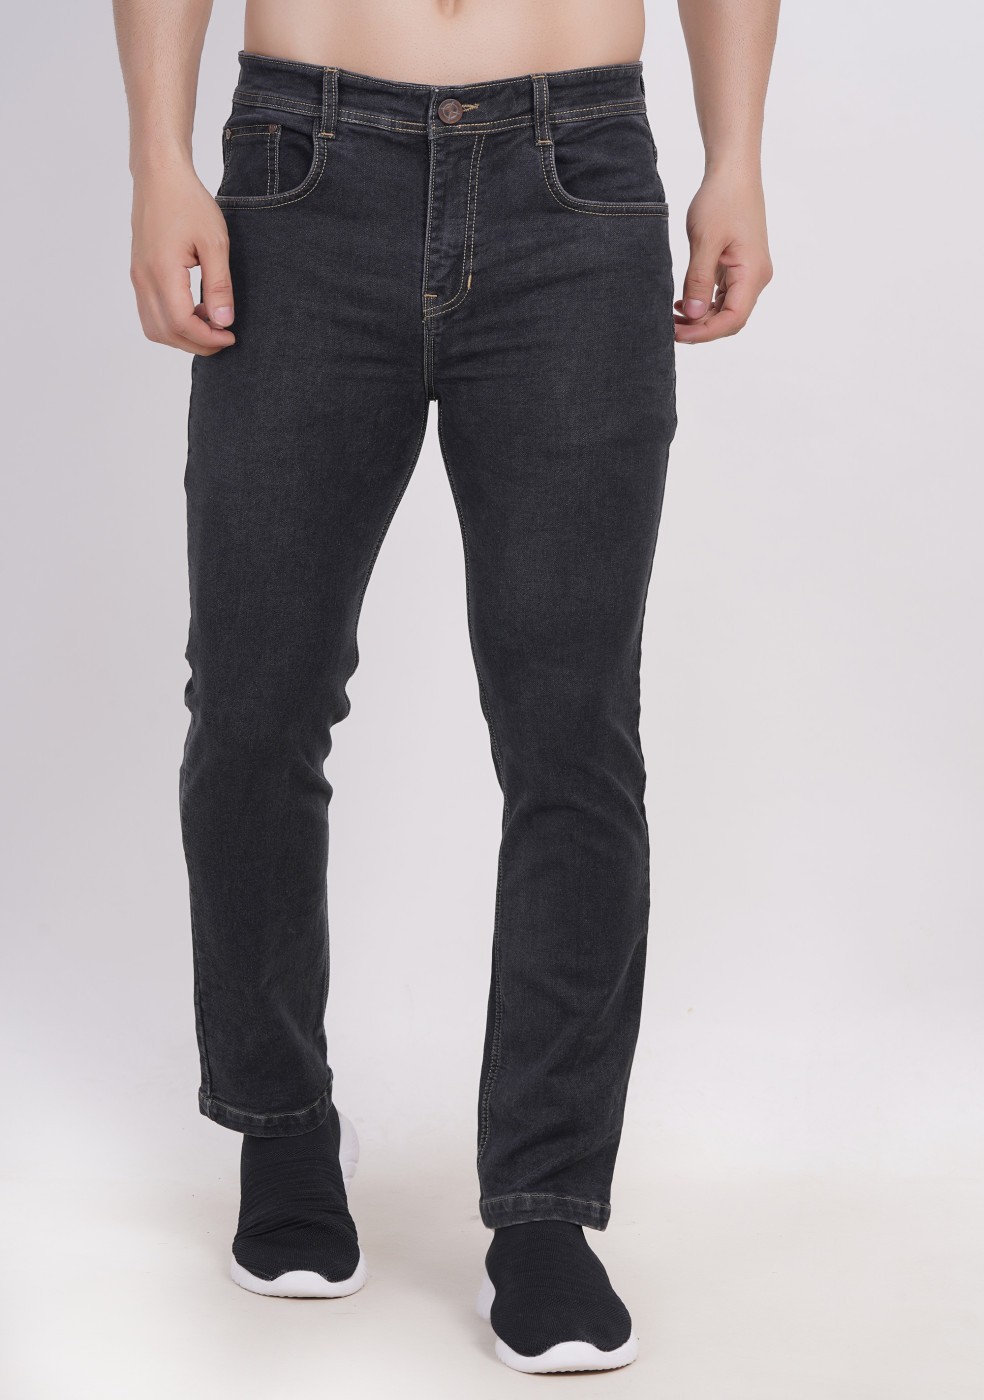 Pants & Jeans, Mens clothing on sale